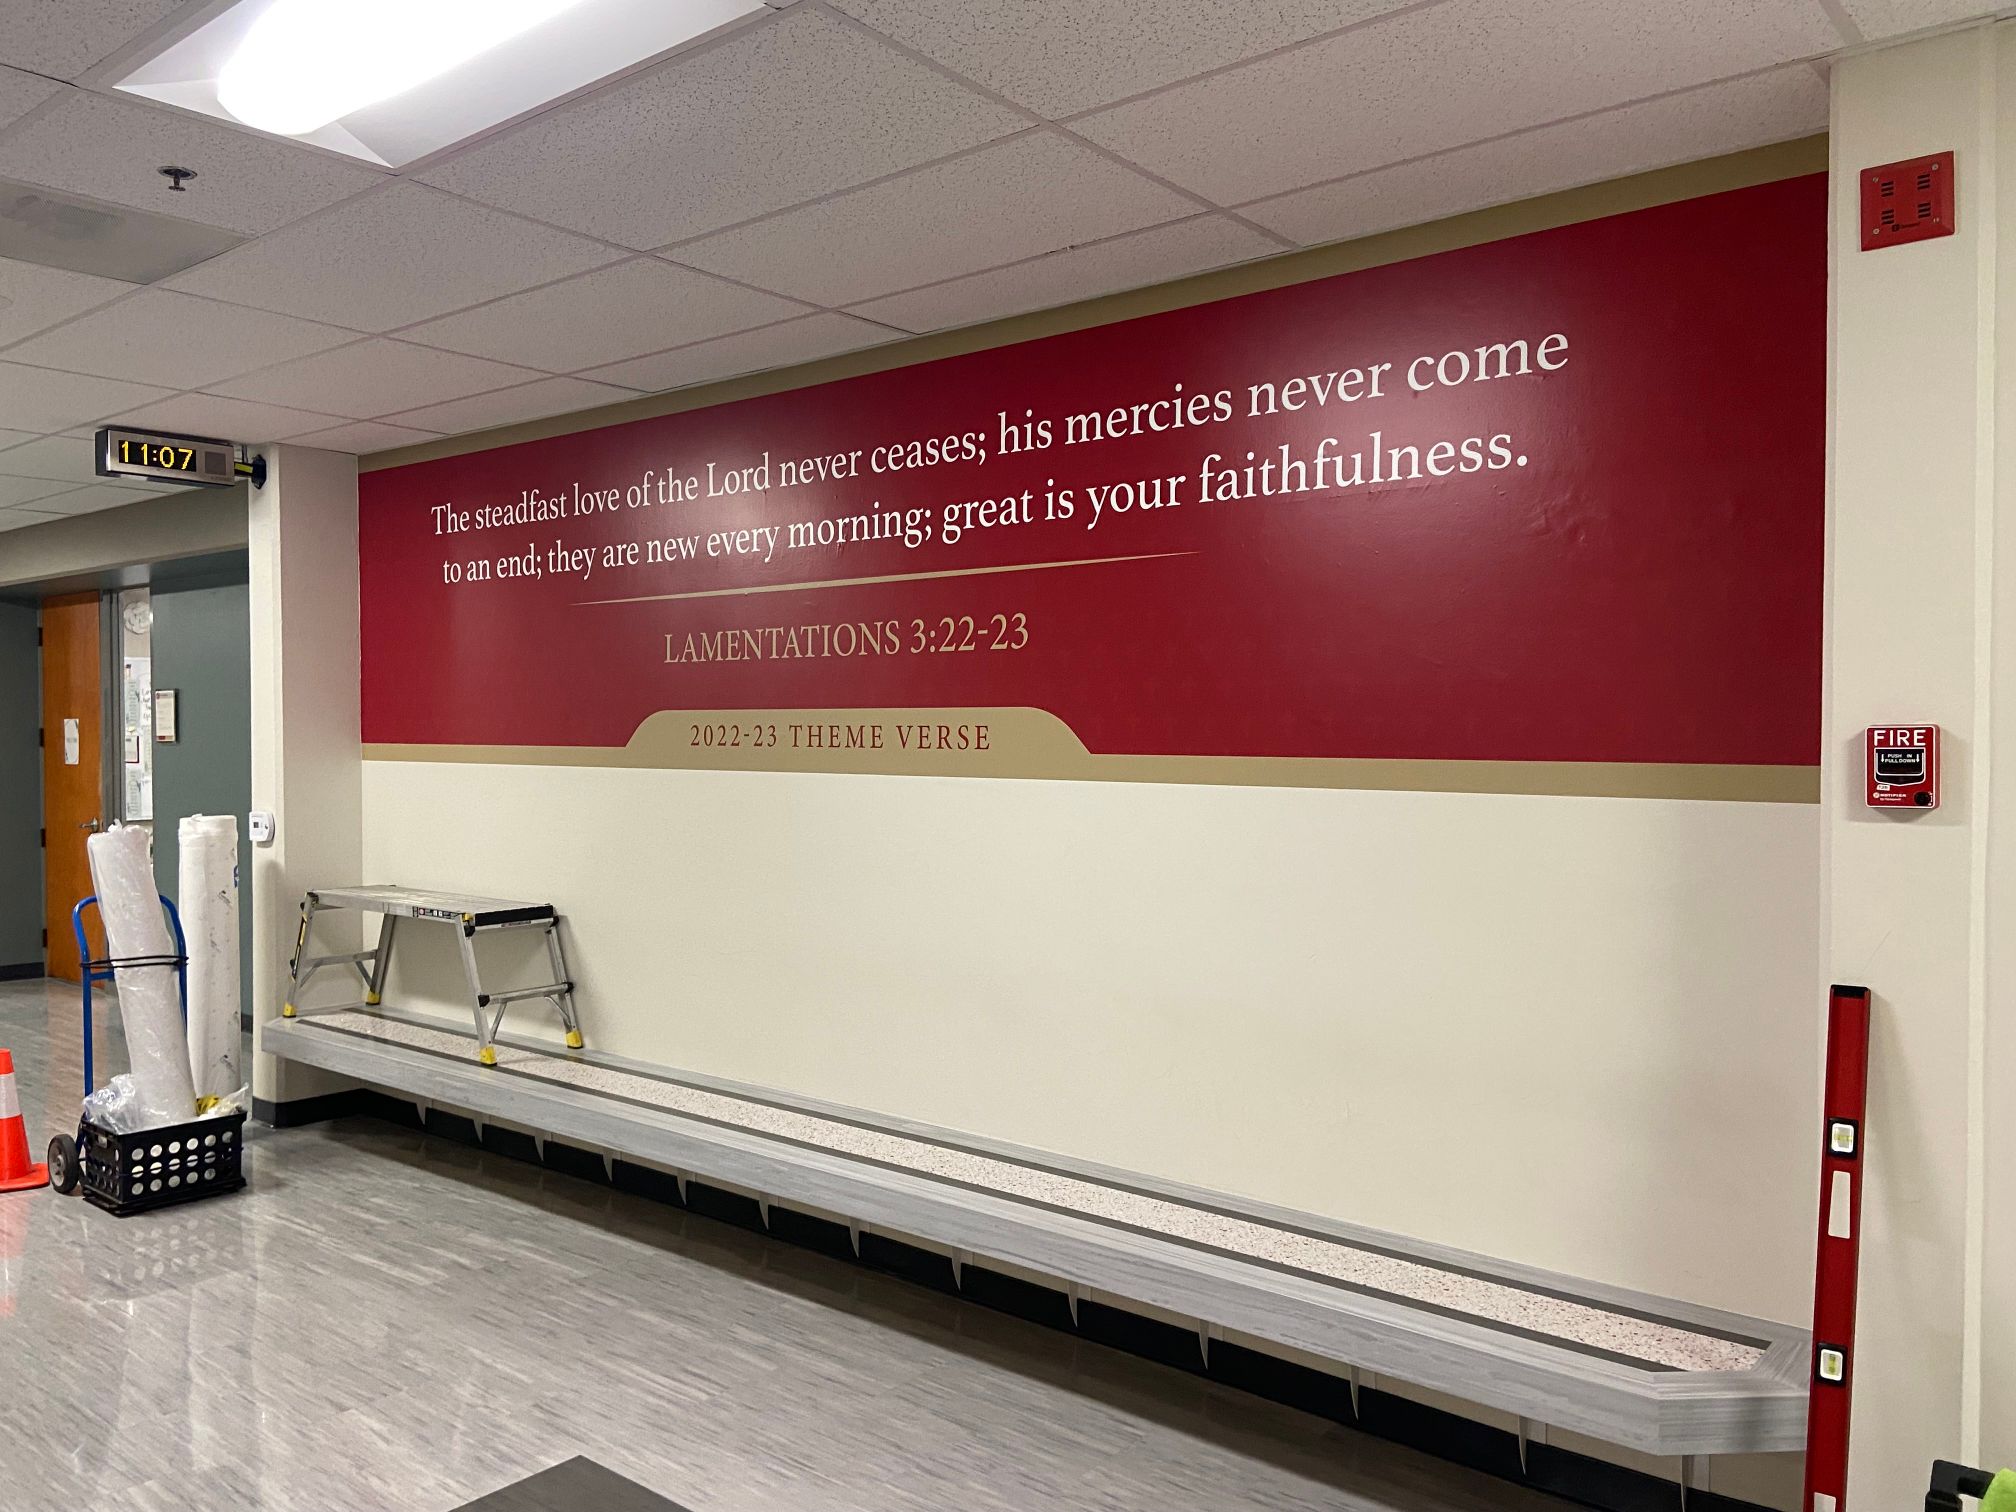 Wall Murals and Graphics for Churches and Schools in Orange County, CA Create Focus on Important Biblical Scriptures